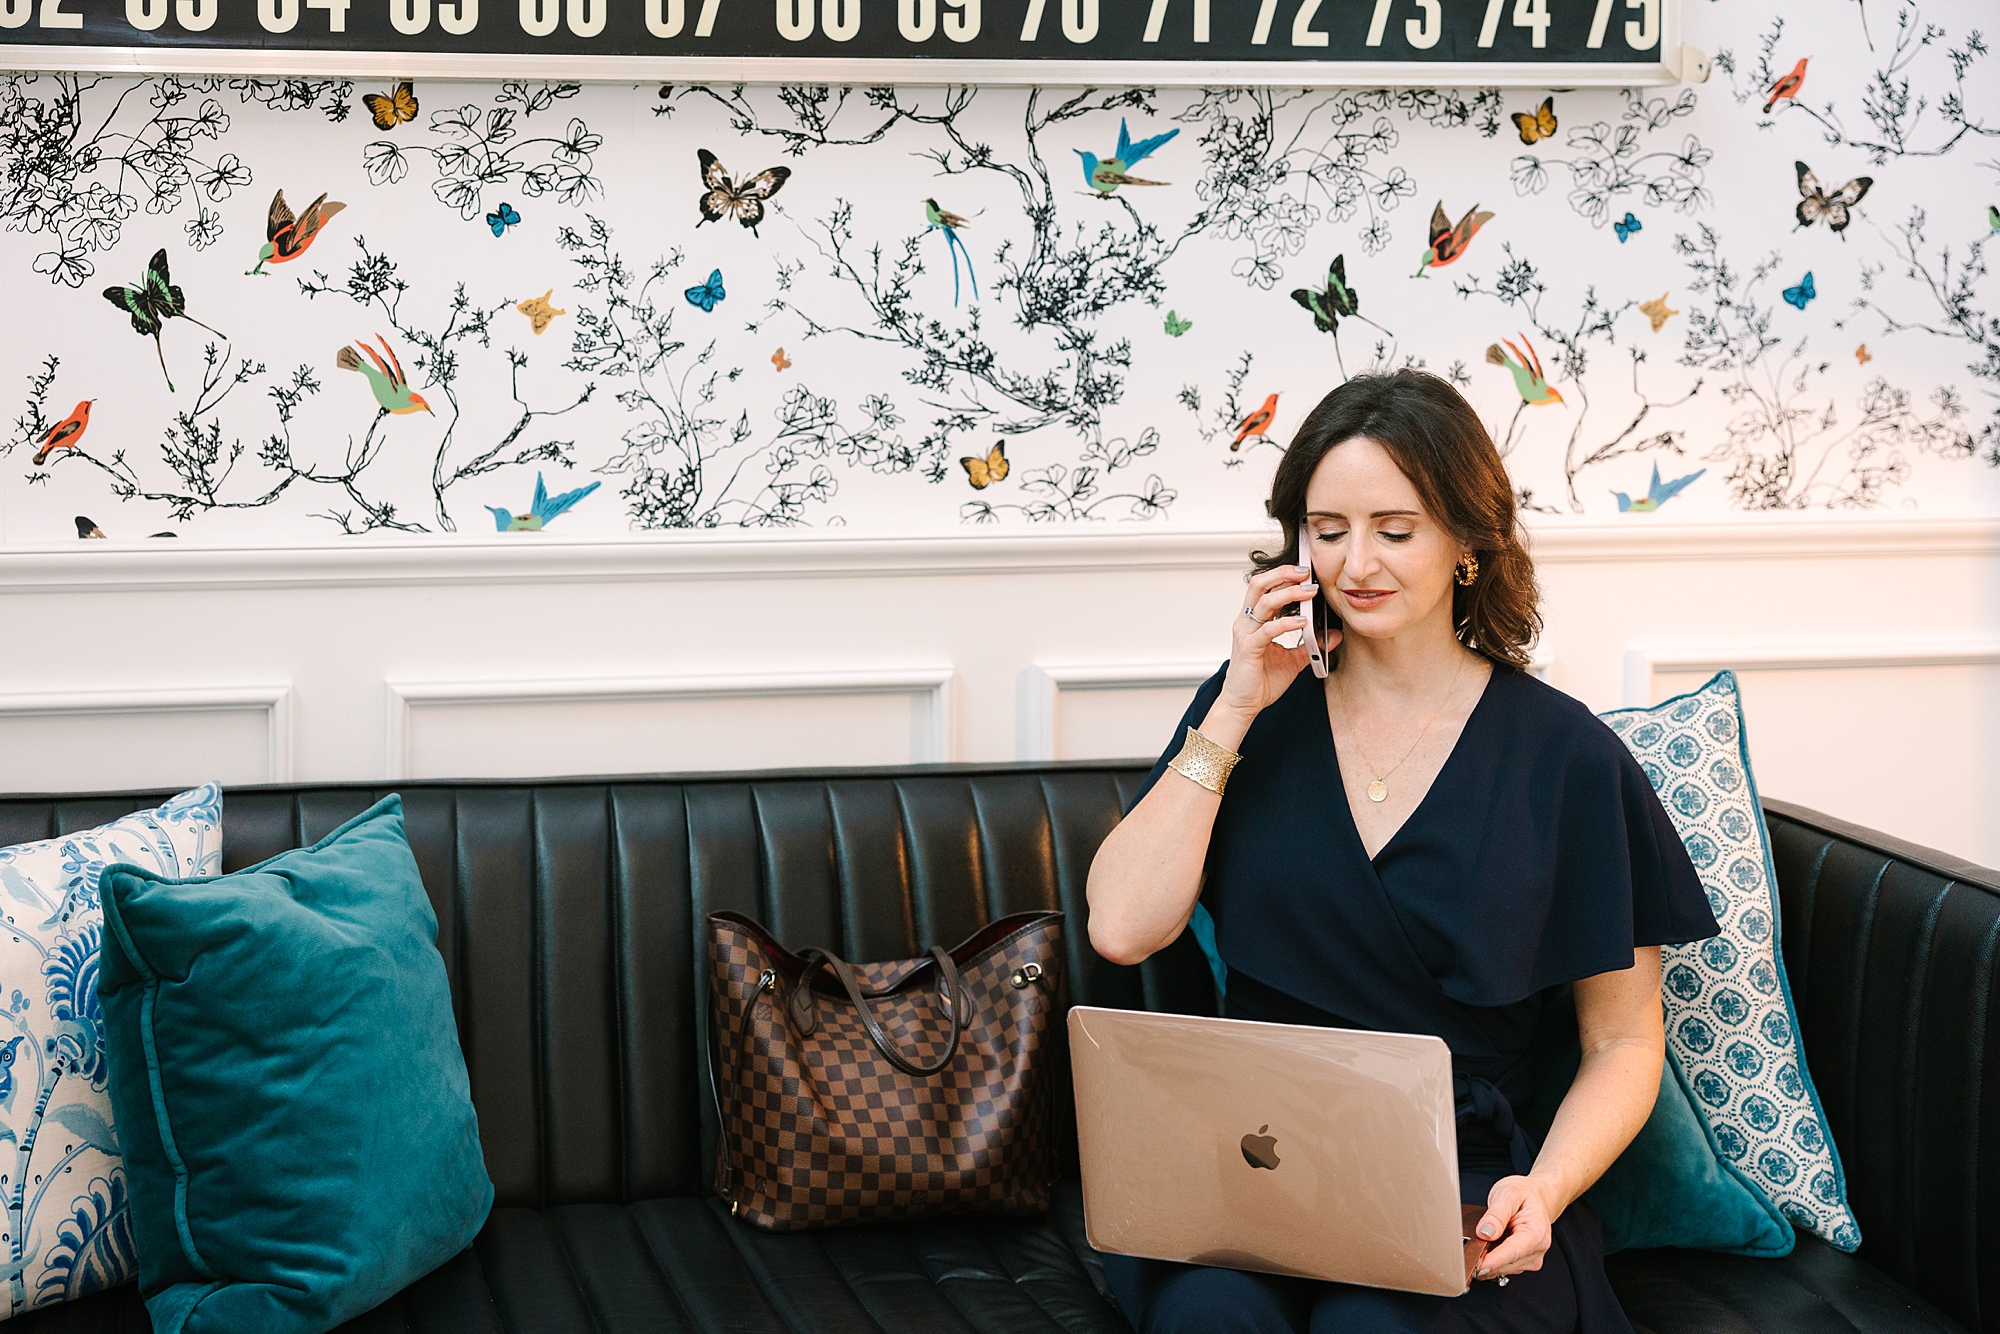 brunette woman in navy dress works on laptop during branding photos